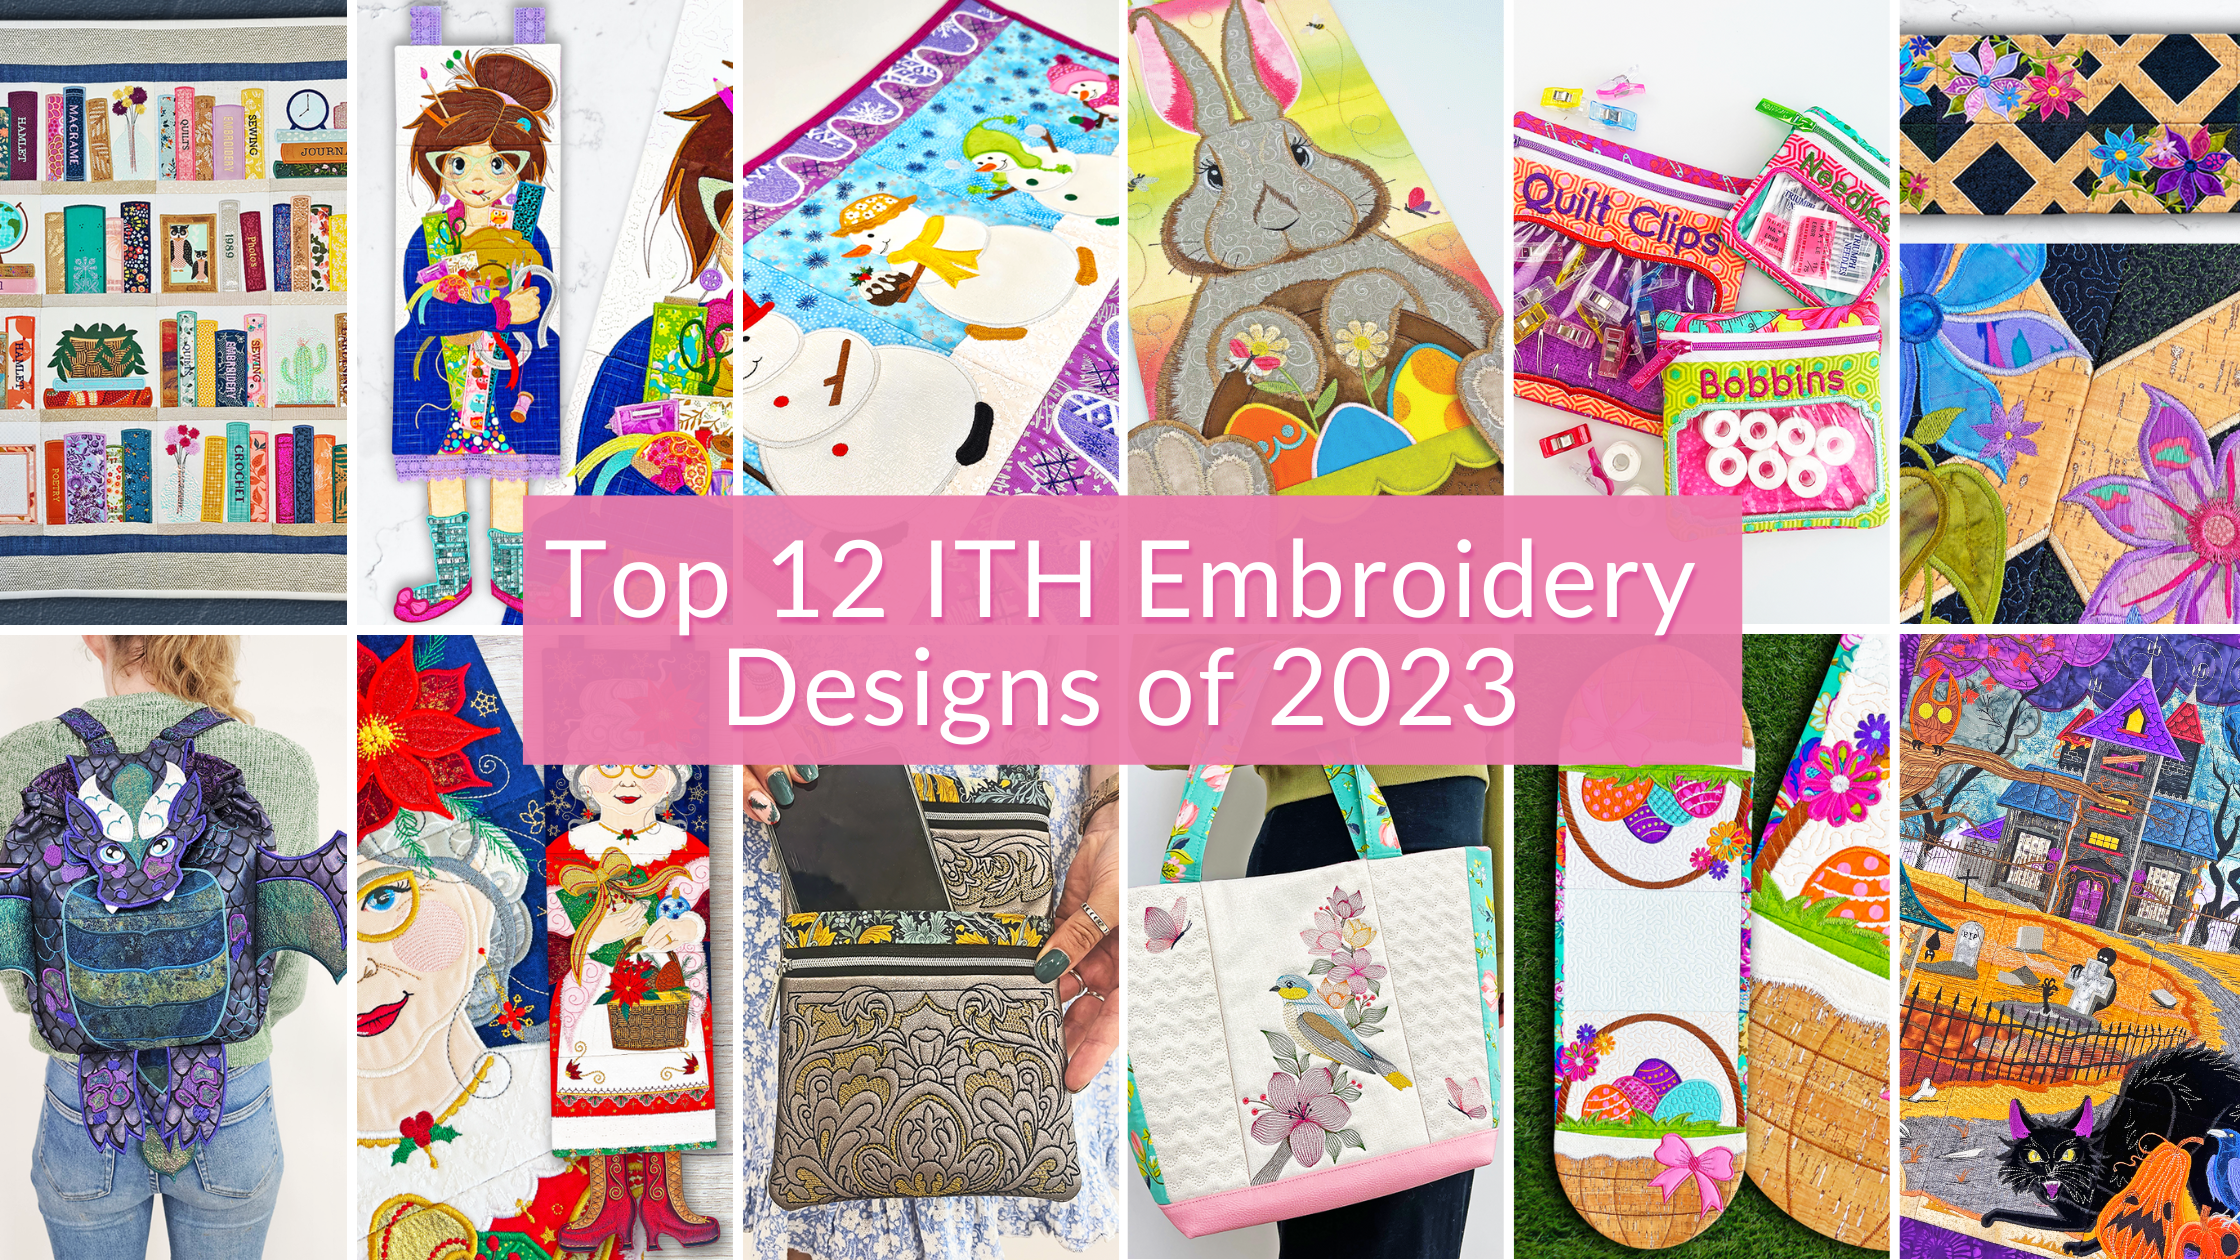 Top 12 ITH Embroidery Designs of 2023